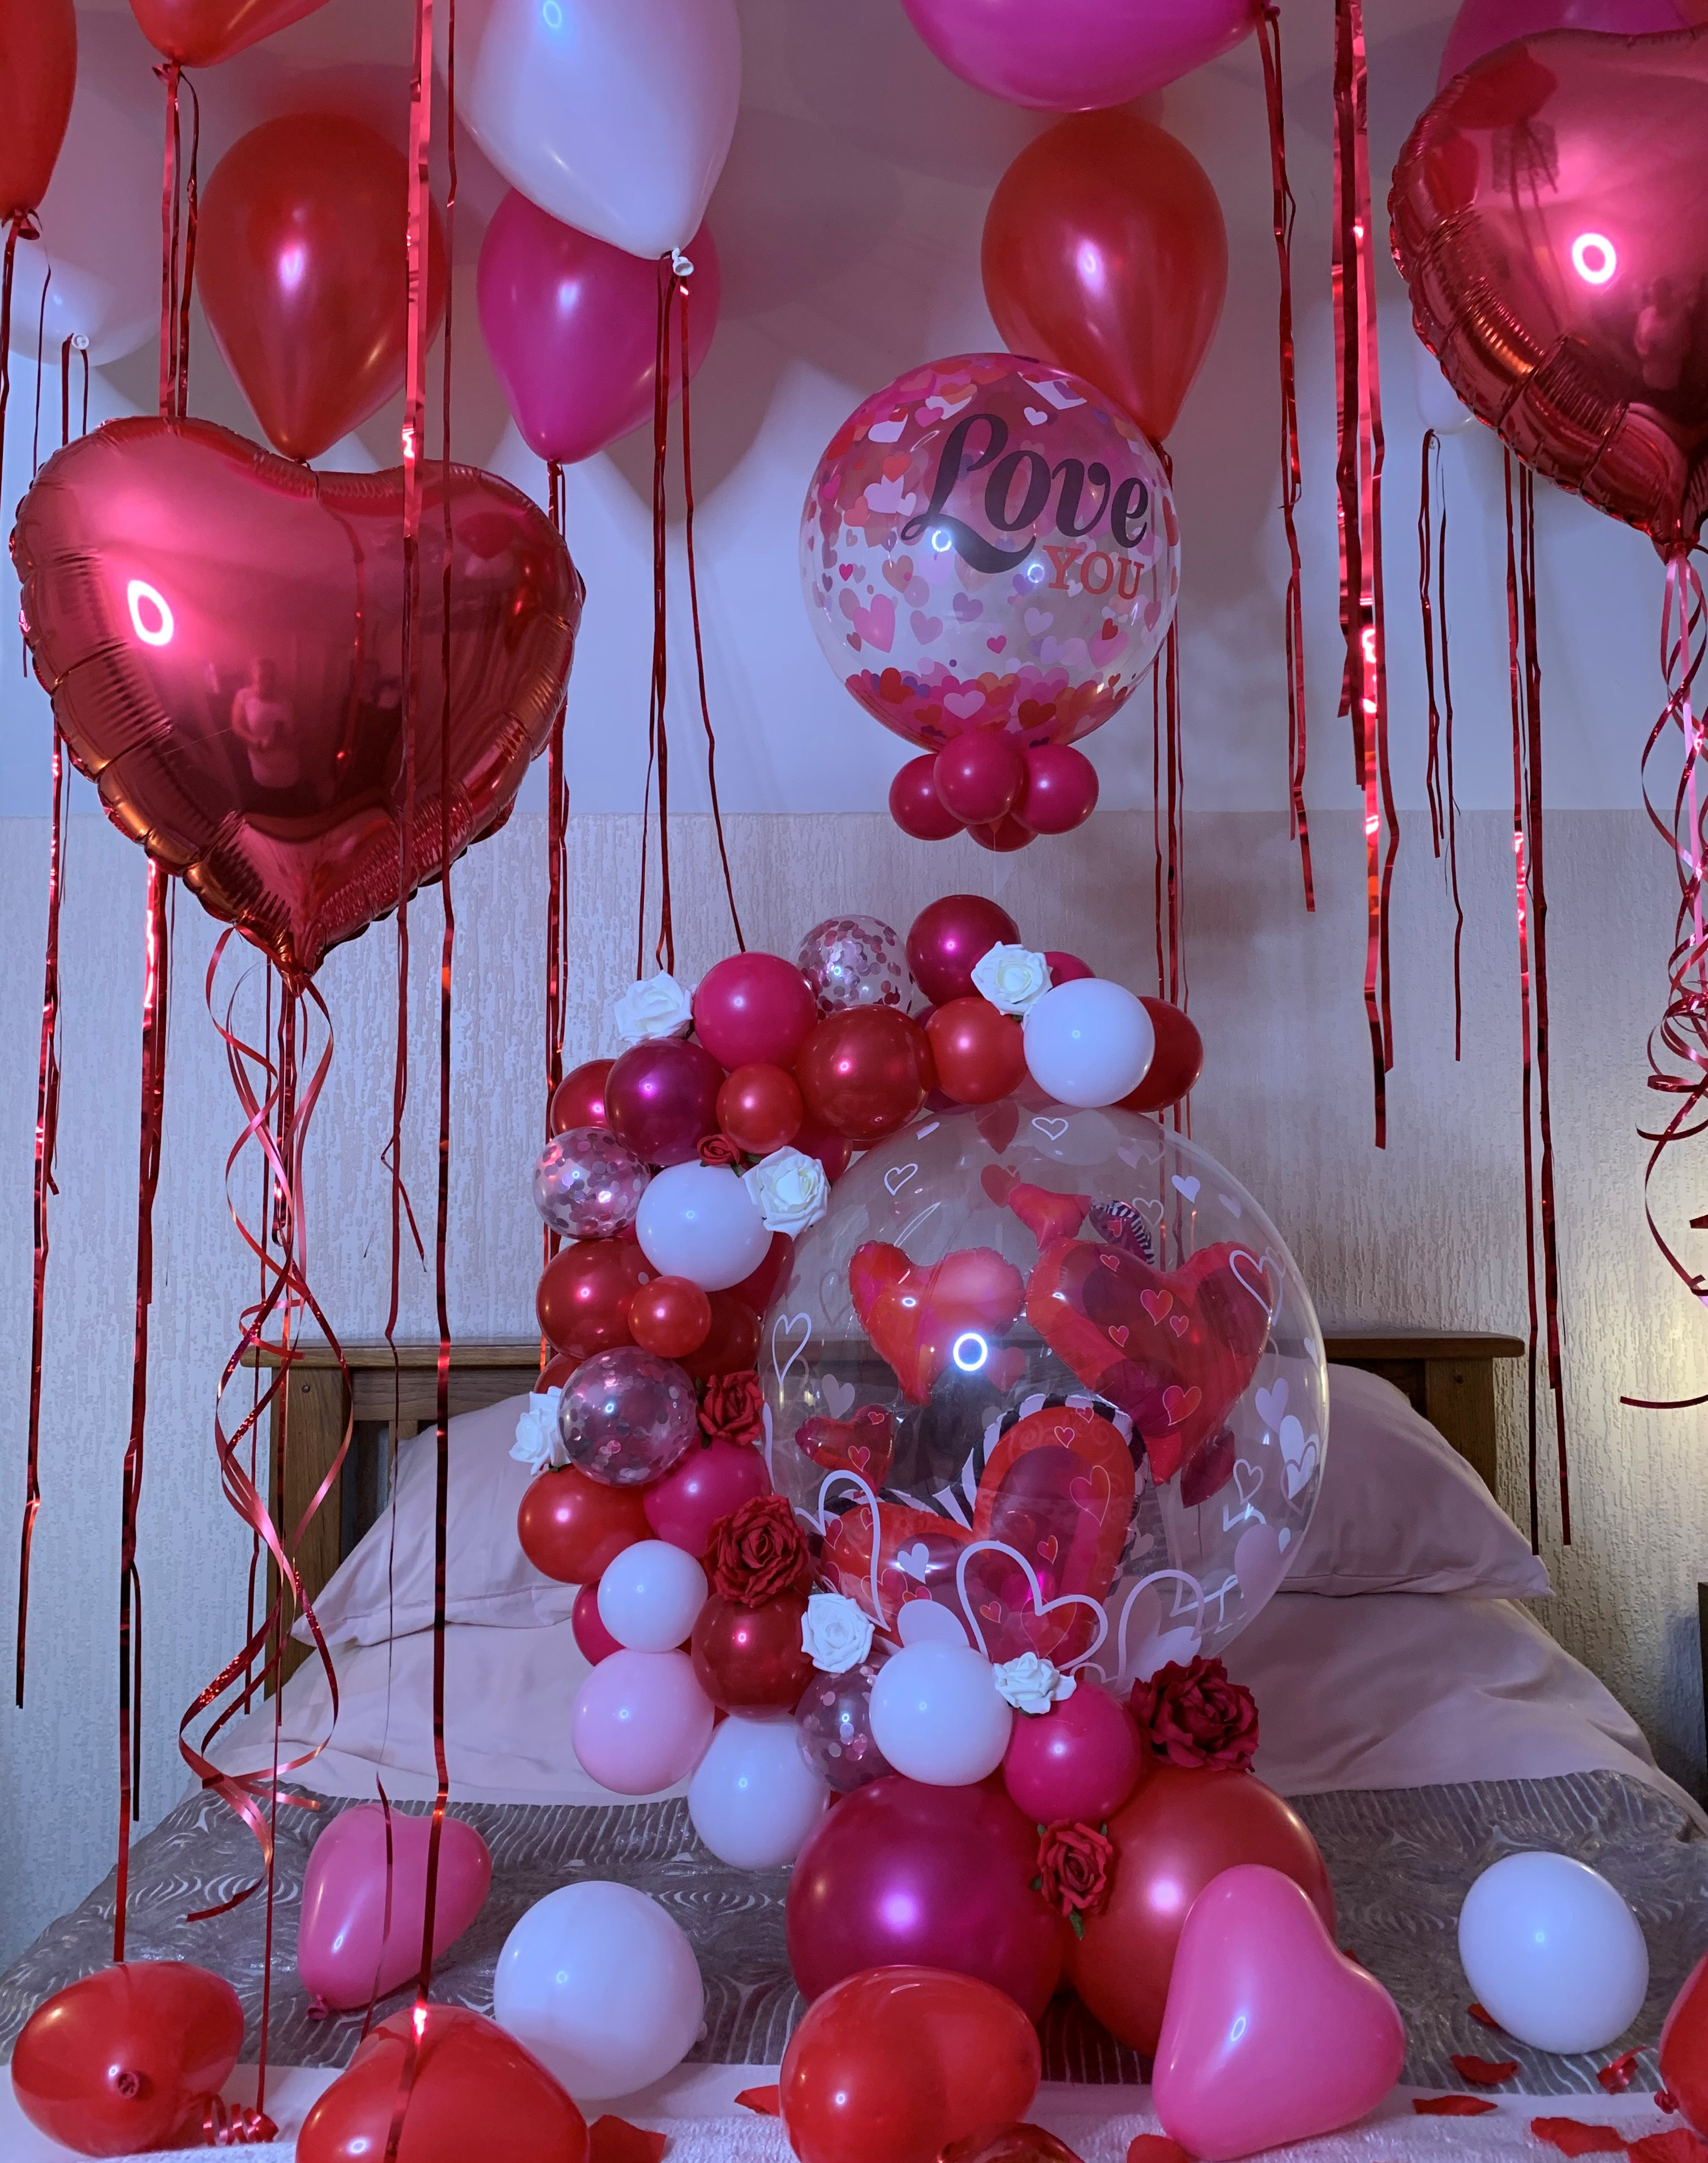 10 DIY Valentine's Day Decor Ideas to Love Up Your Home – SheKnows